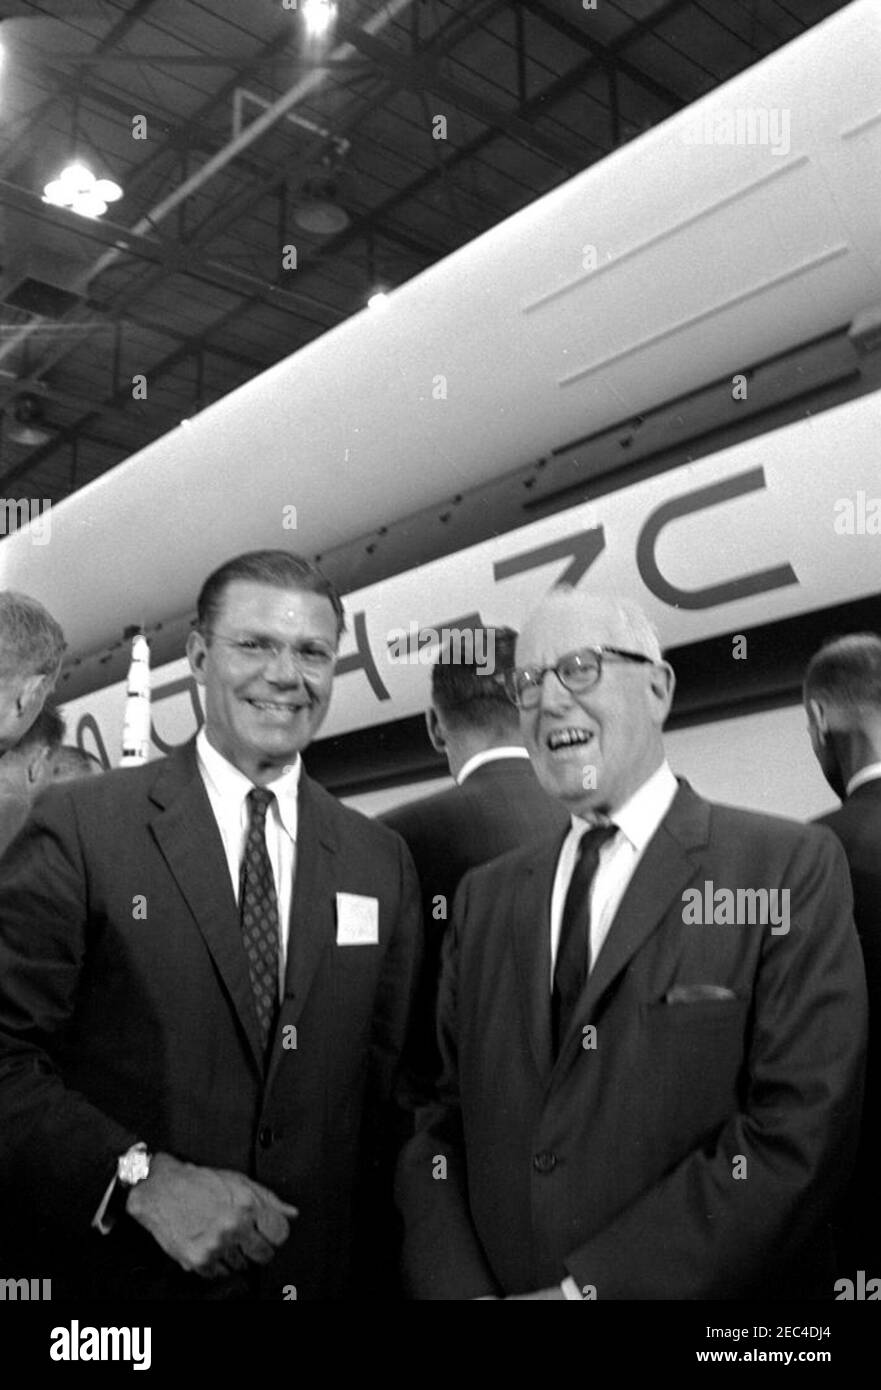 Inspection tour of NASA installations: Huntsville Alabama, Redstone Army Airfield and George C. Marshall Space Flight Center, 9:35AM. Secretary of Defense, Robert S. McNamara (left), and Representative George P. Miller (California) stand in front of an exhibit of the Saturn rocket, during President John F. Kennedyu0027s visit to the George C. Marshall Space Flight Center (MSFC) at Redstone Arsenal, Huntsville, Alabama. President Kennedy visited the MSFC as part of a two-day inspection tour of National Aeronautics and Space Administration (NASA) field installations. Stock Photo